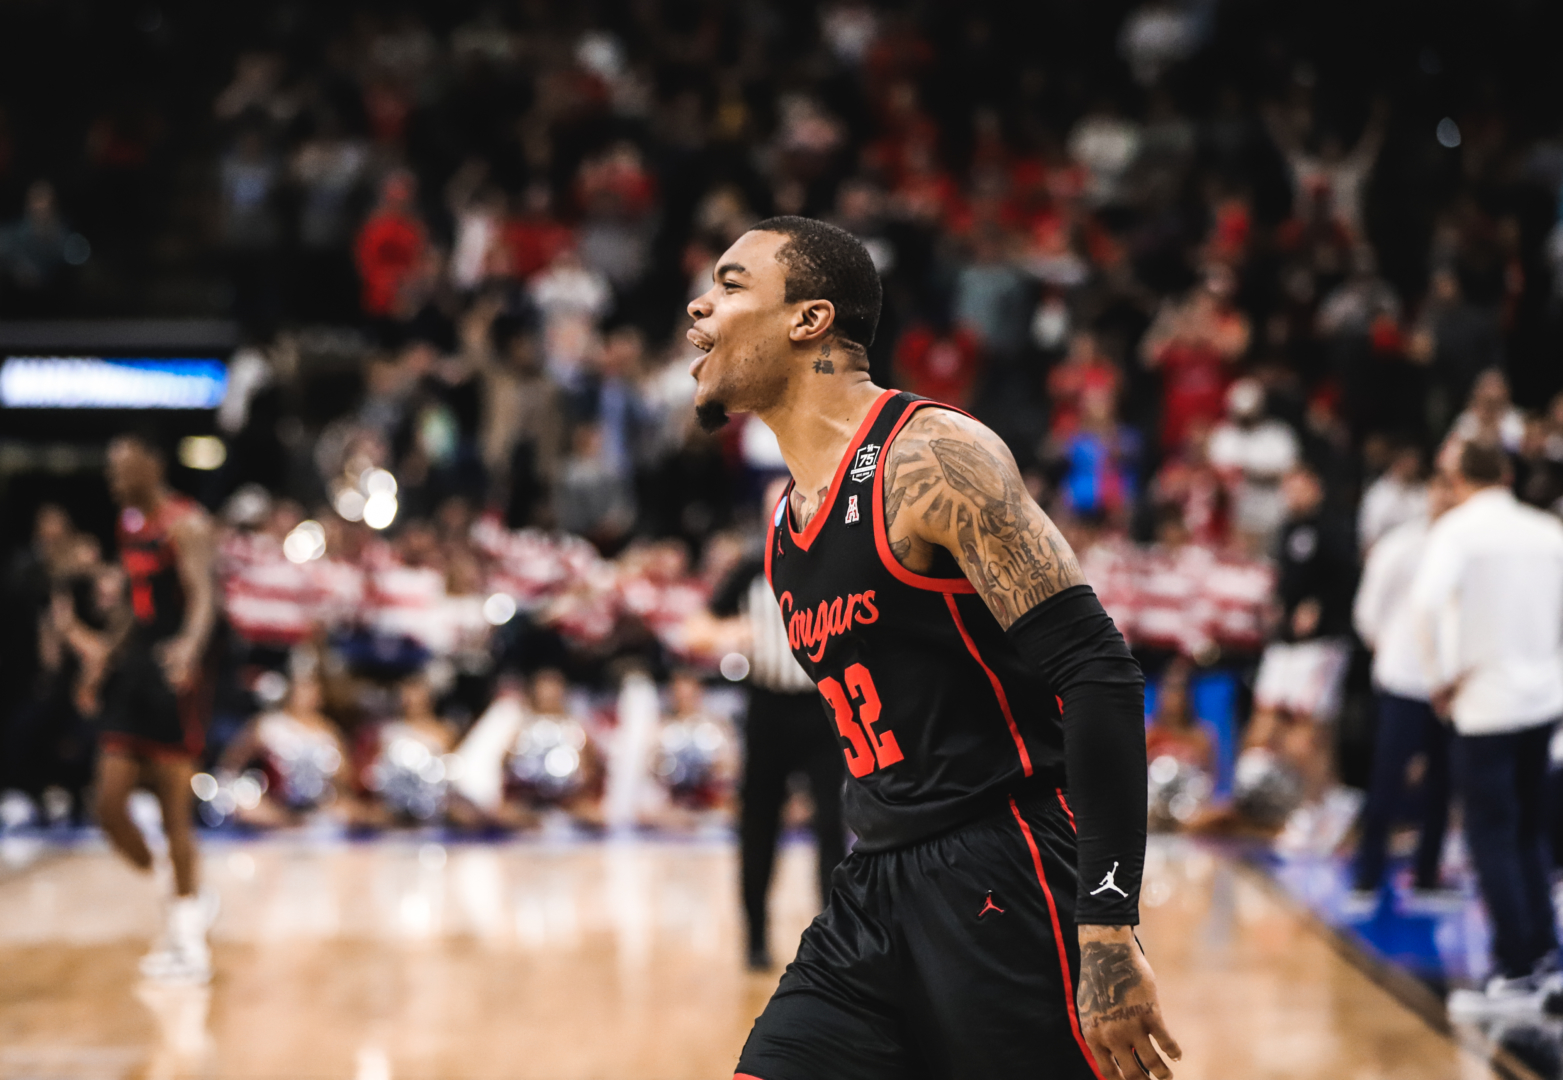 For the second straight year, UH is headed to the Elite Eight and one win away from back-to-back Final Four trips. | Sean Thomas/The Cougar